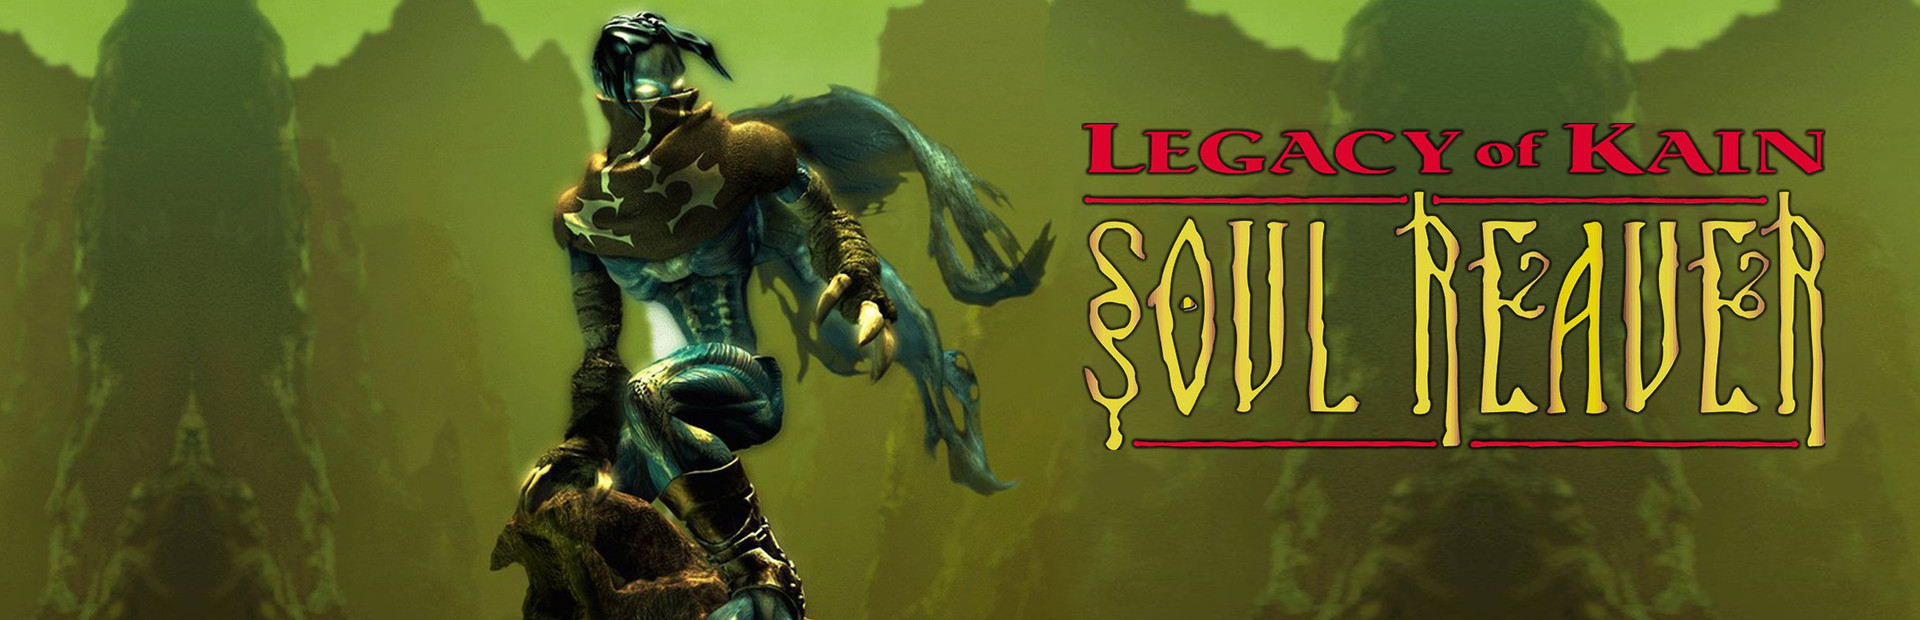 Legacy of kain steam фото 113